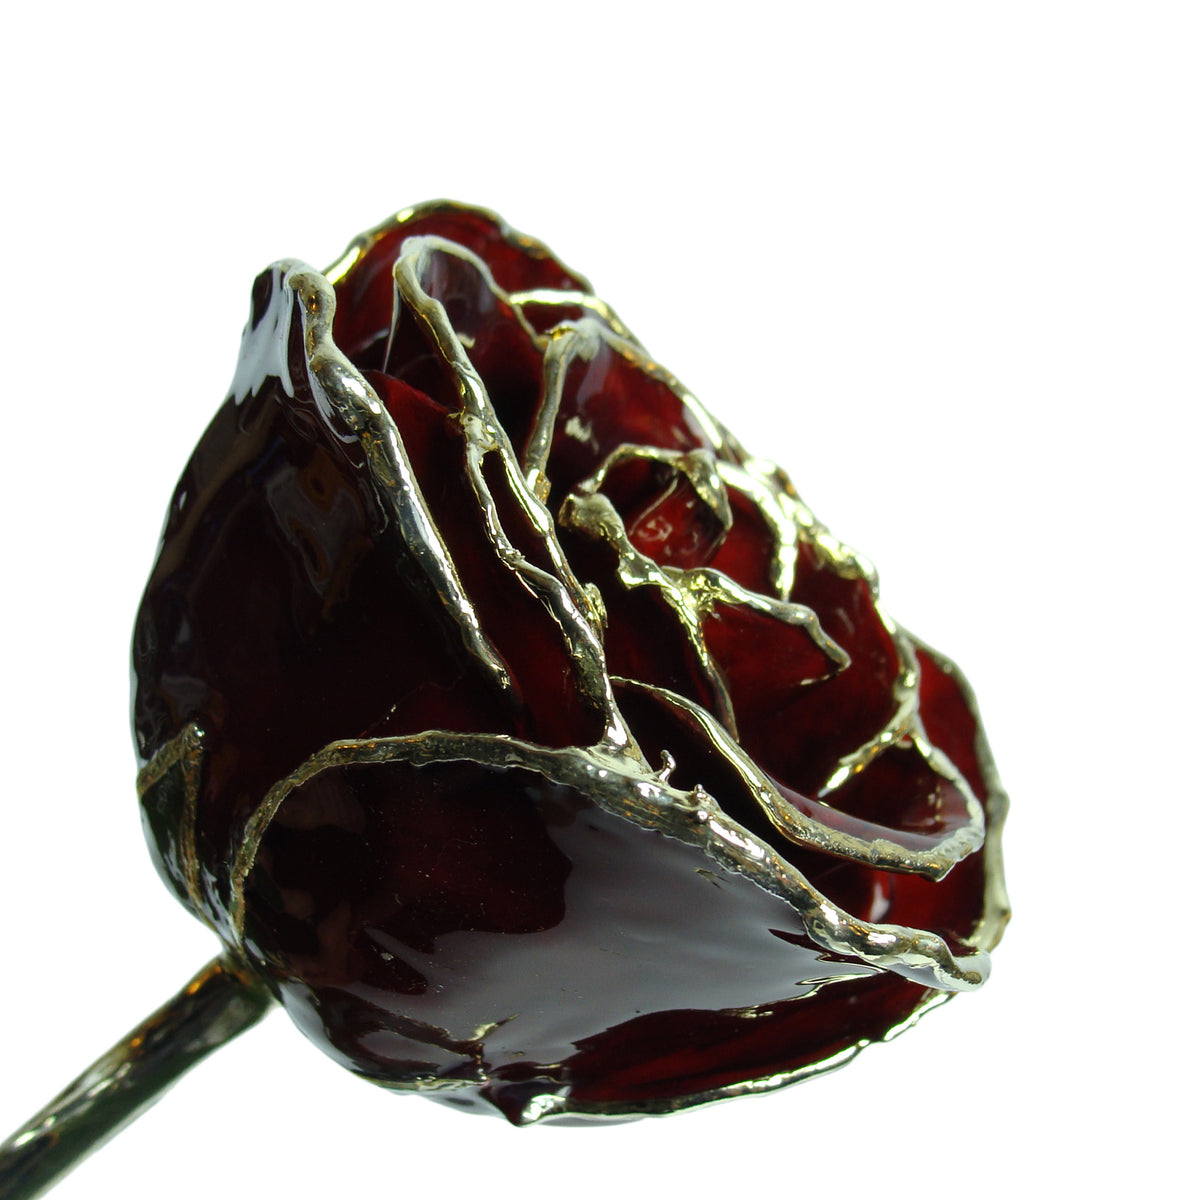 Silver Trimmed Forever Rose with Burgundy Petals. View of Stem, Leaves, and Rose Petals and Showing Detail of Silver Trim